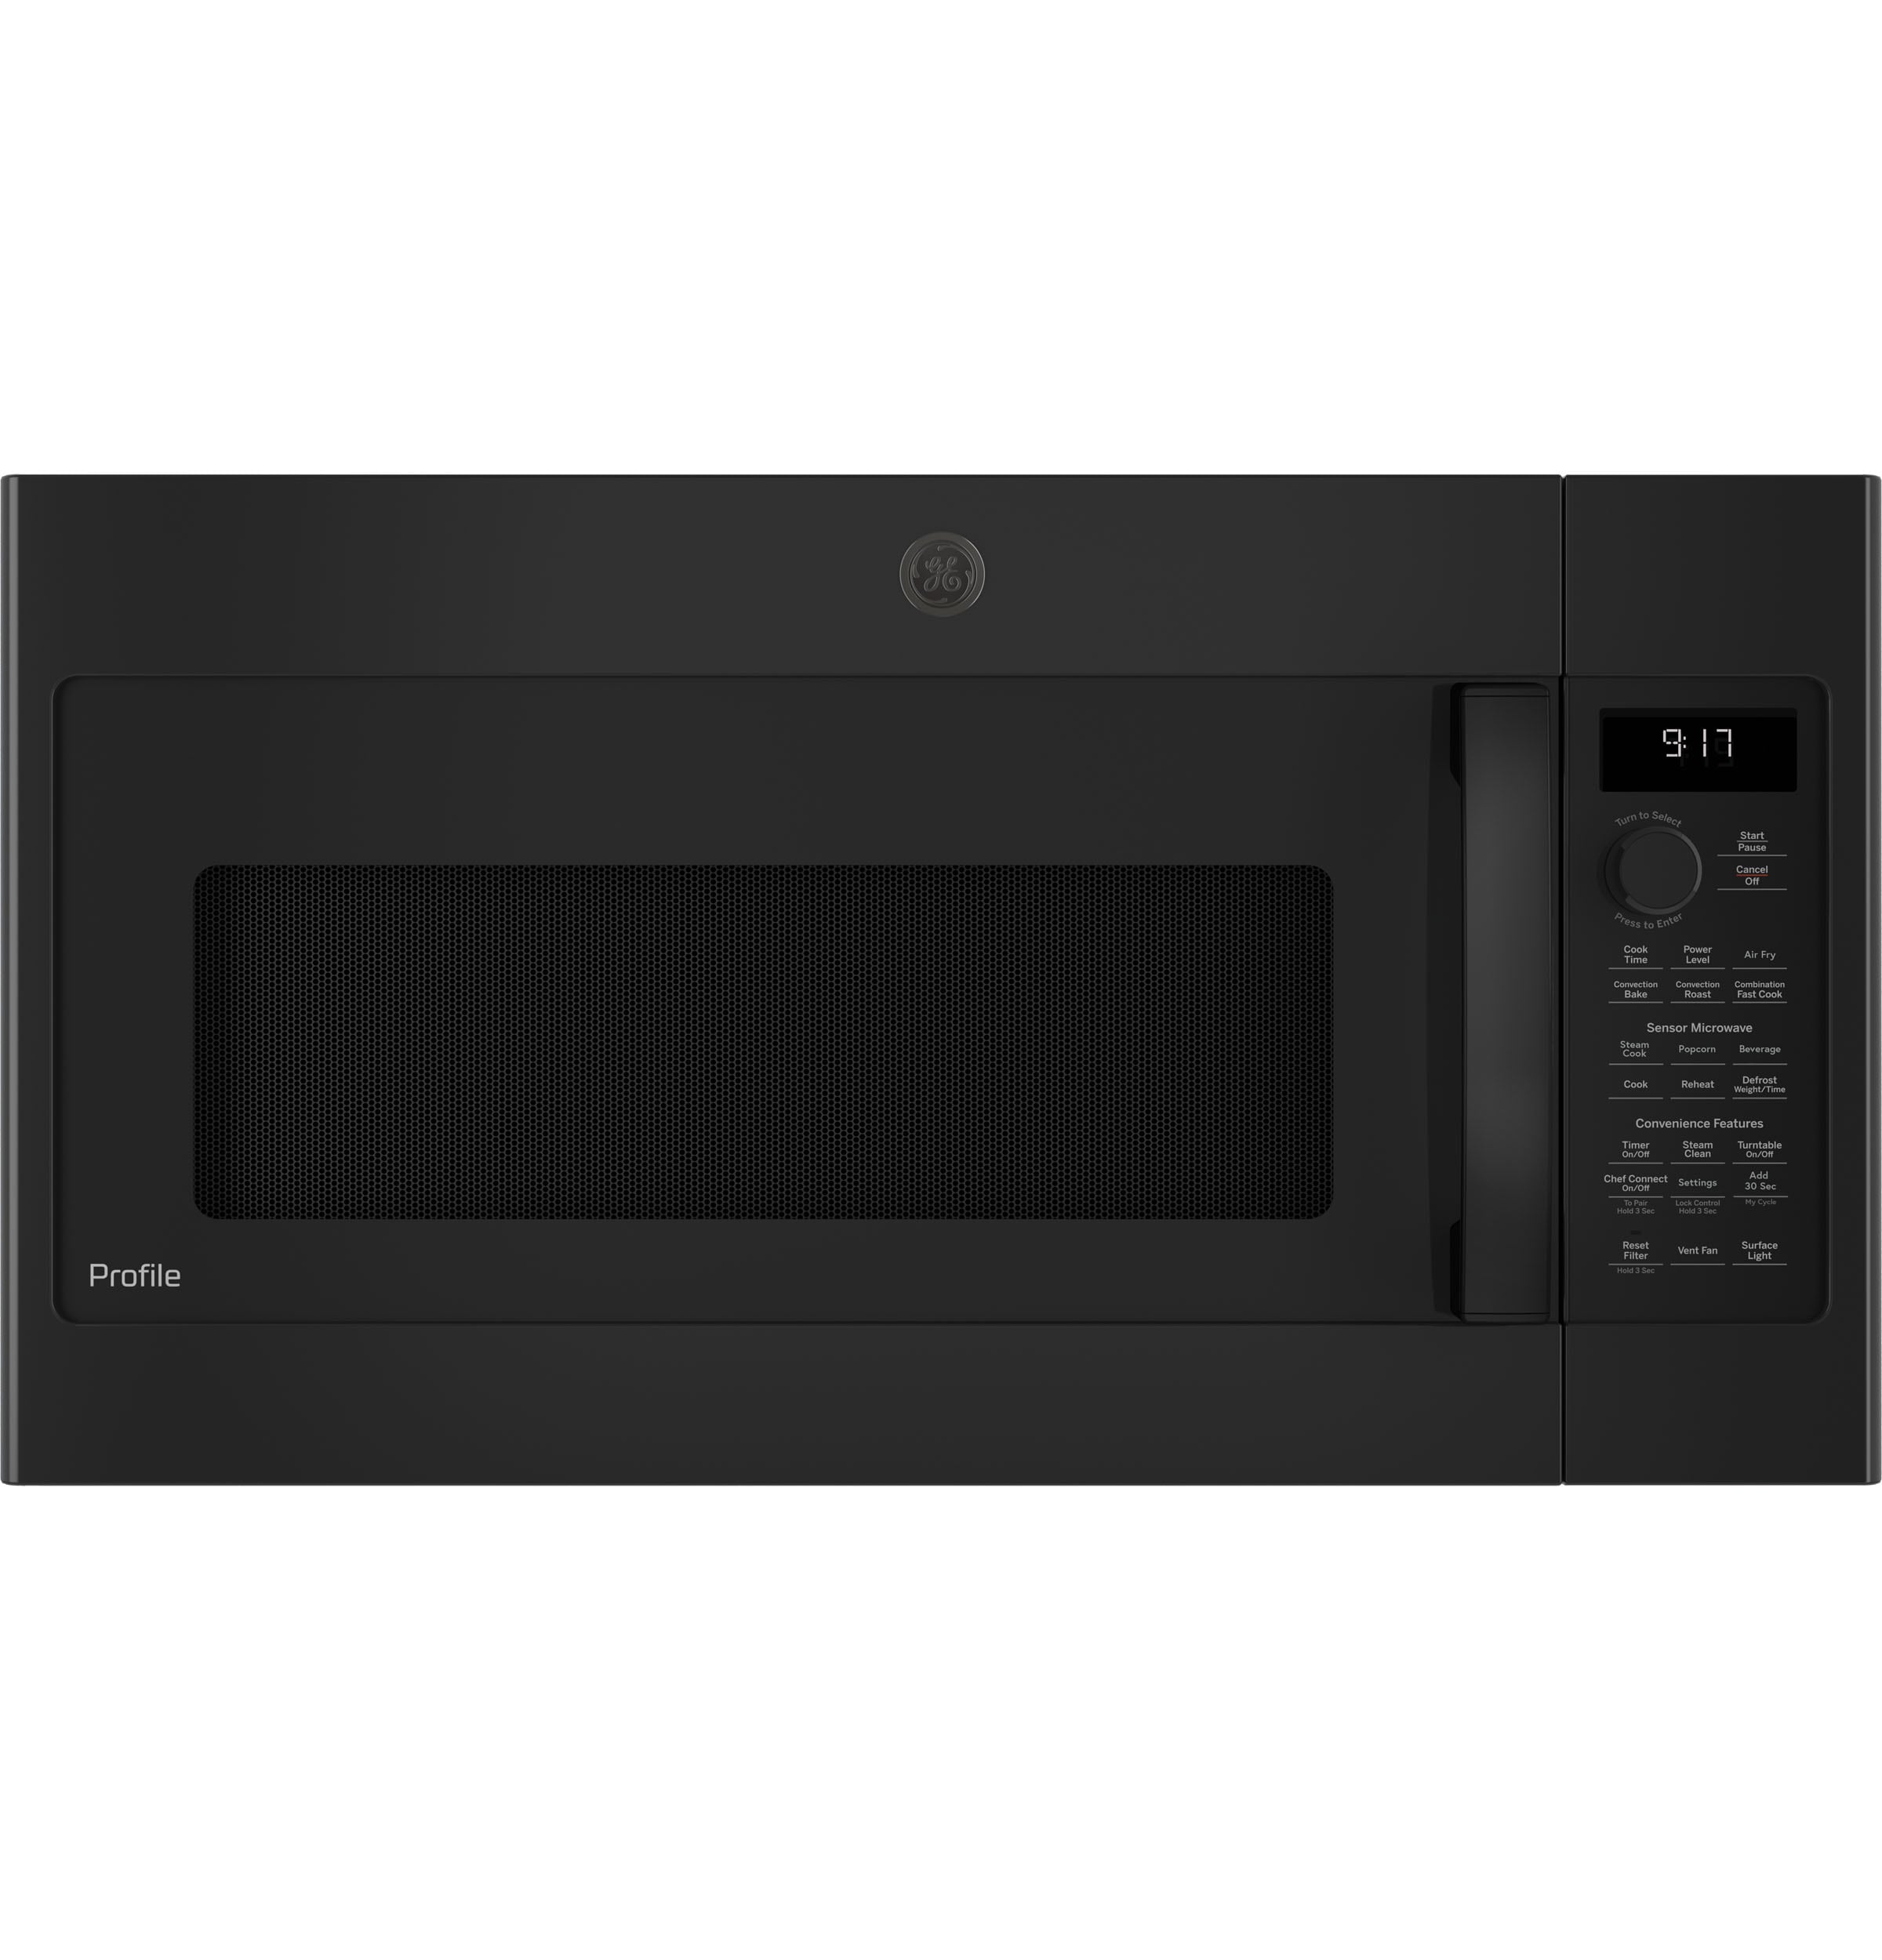 Microwave Power Levels, Settings & Features